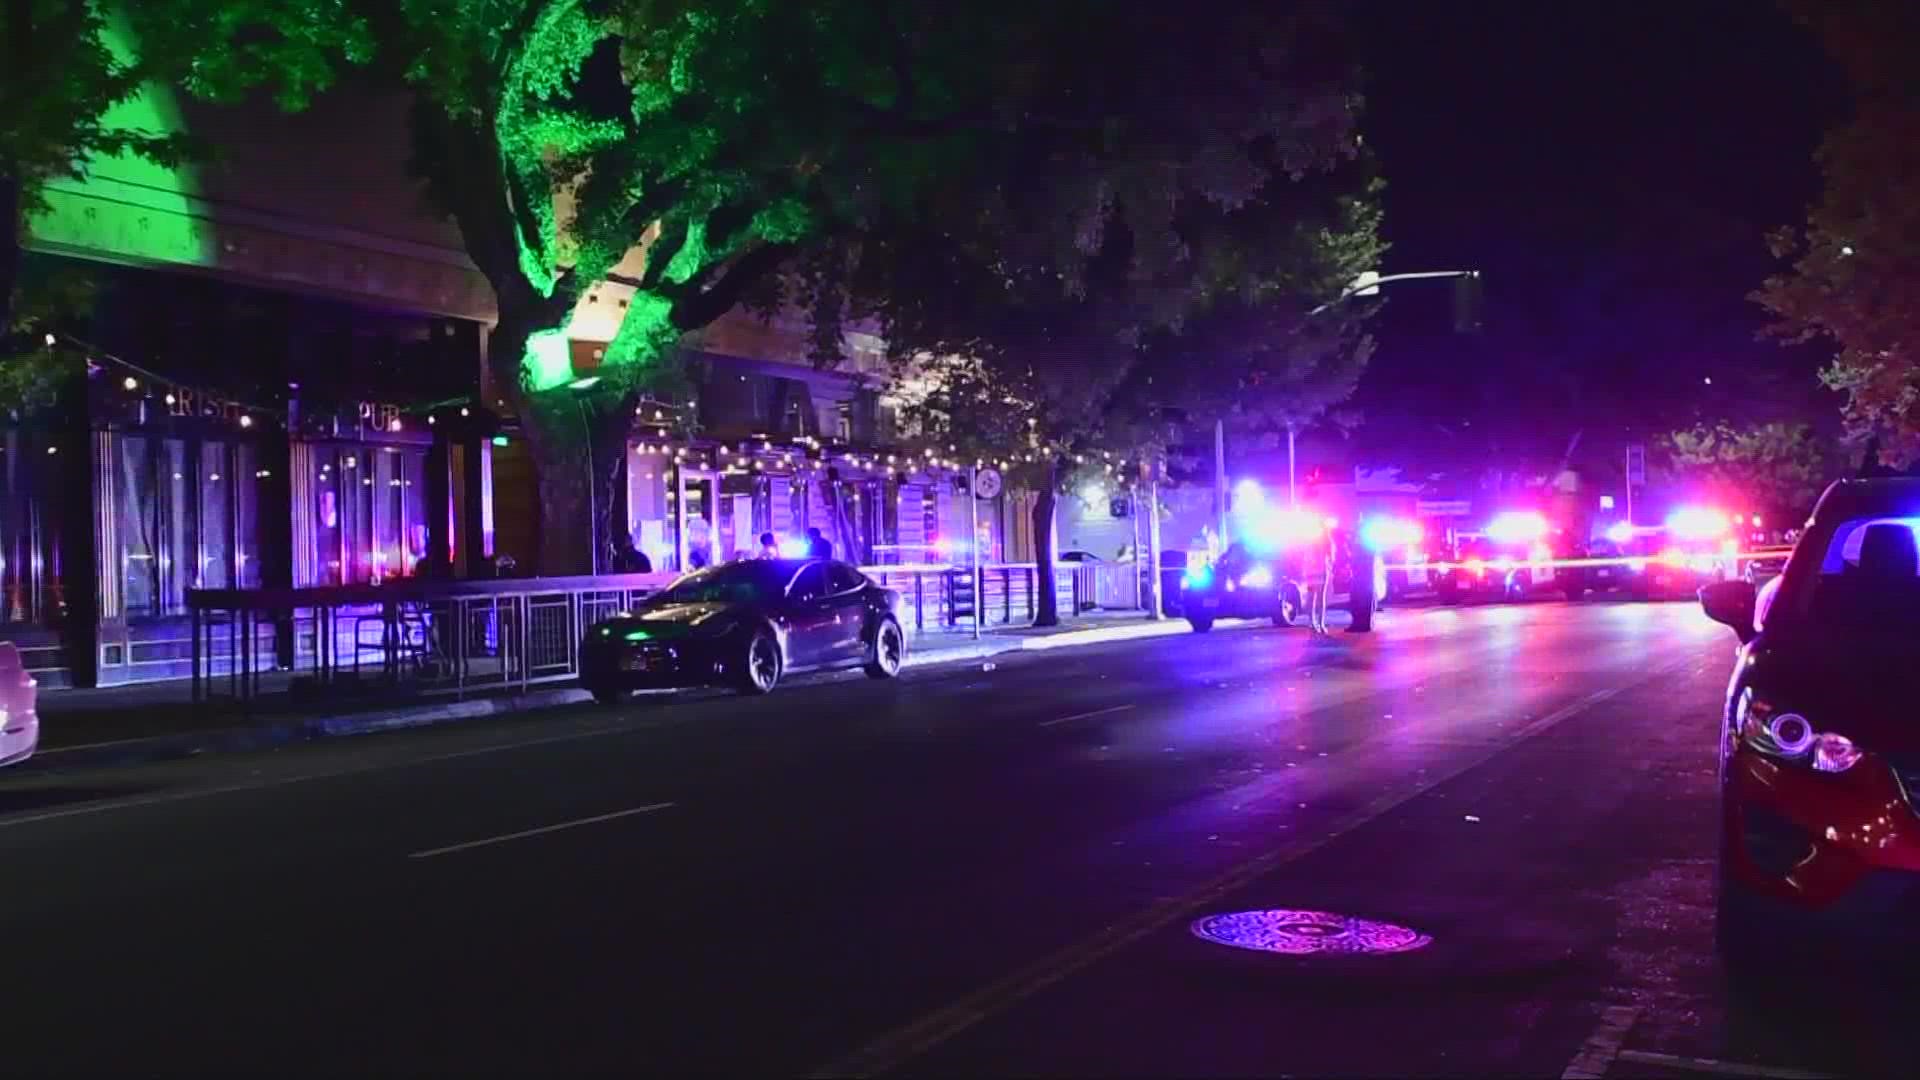 According to the Sacramento Police Department, the shooting happened in the area of 15th Street and L Street.